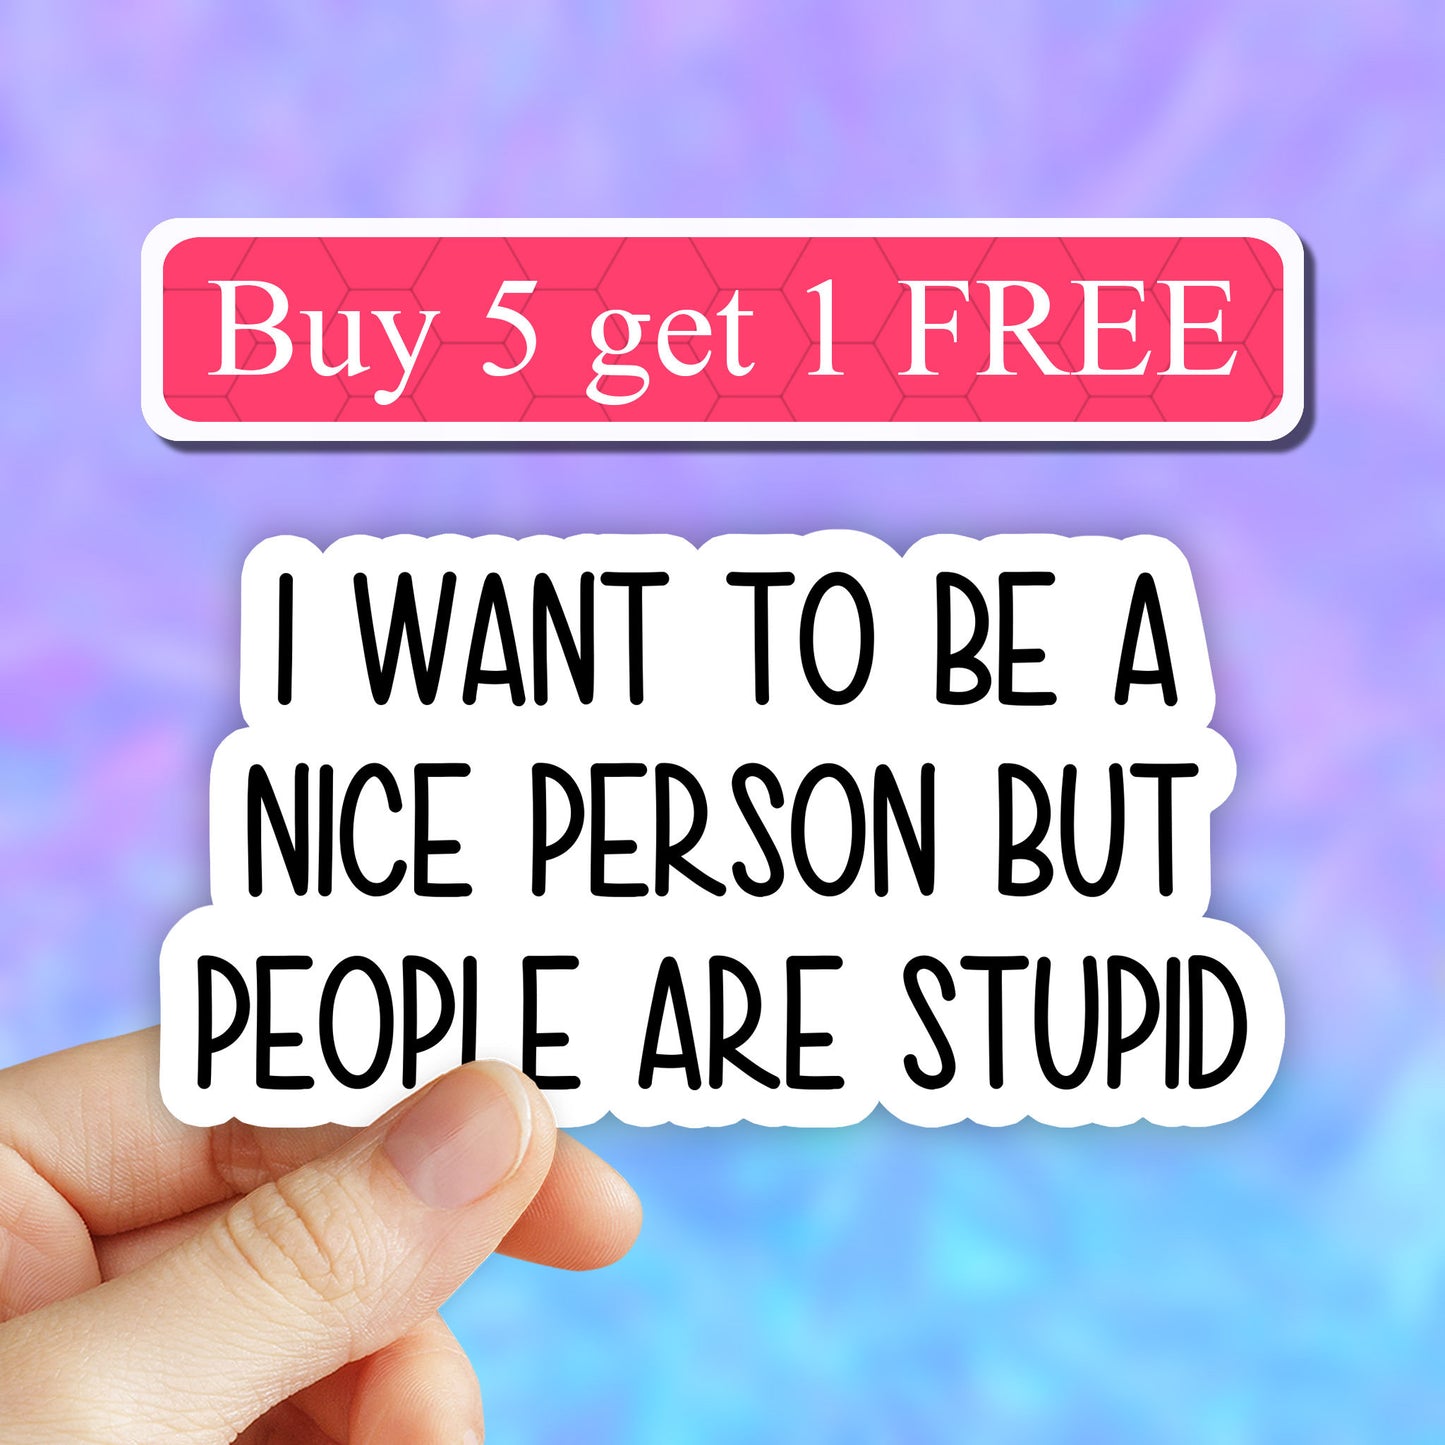 I want to be a nice person but people are stupid sticker, Laptop stickers, attitude funny stickers, attitude sarcasm laptop decal, sarcastic